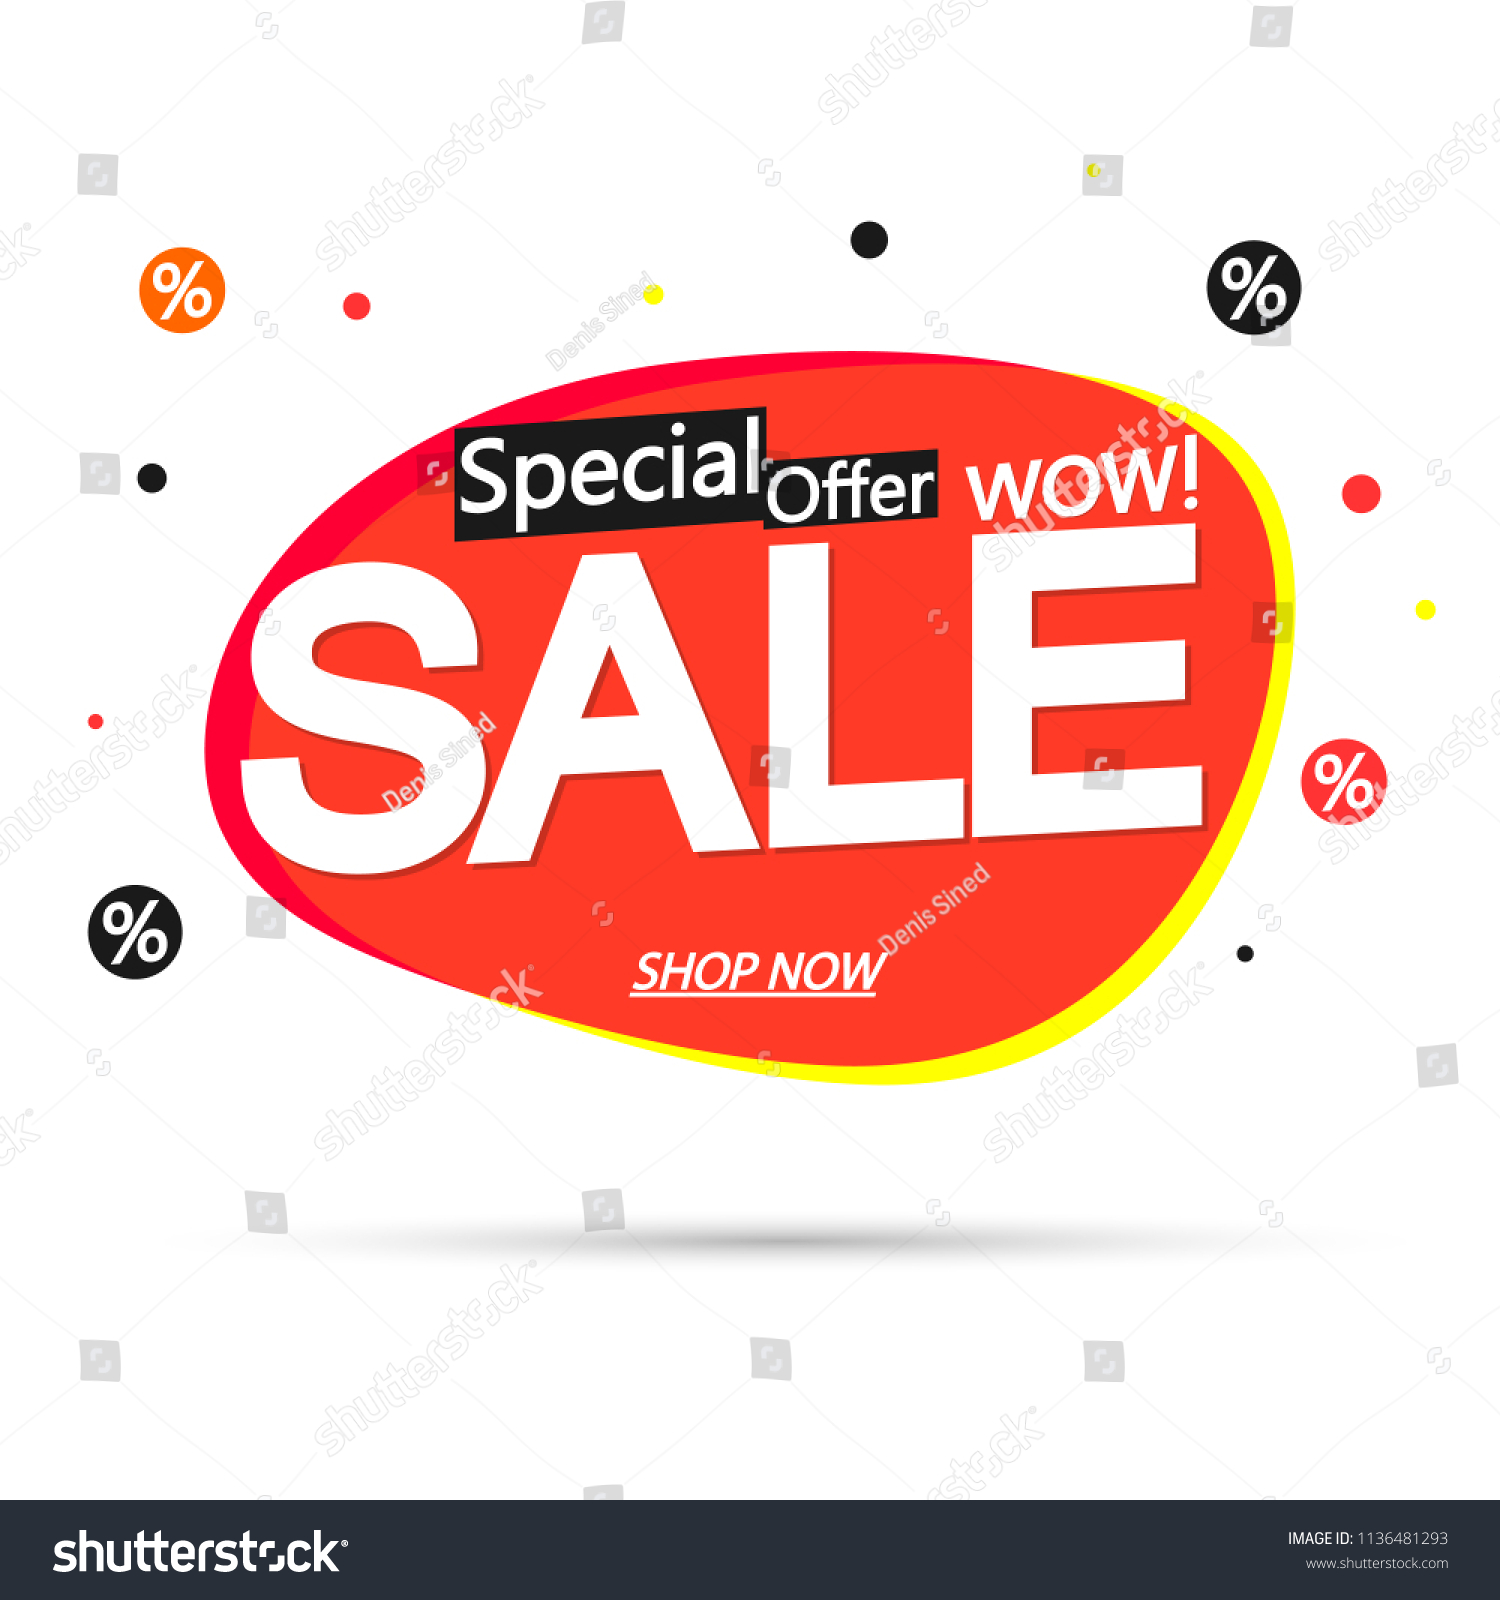 Sale bubble banner design template, discount tag, special offer, app icon, vector illustration #1136481293